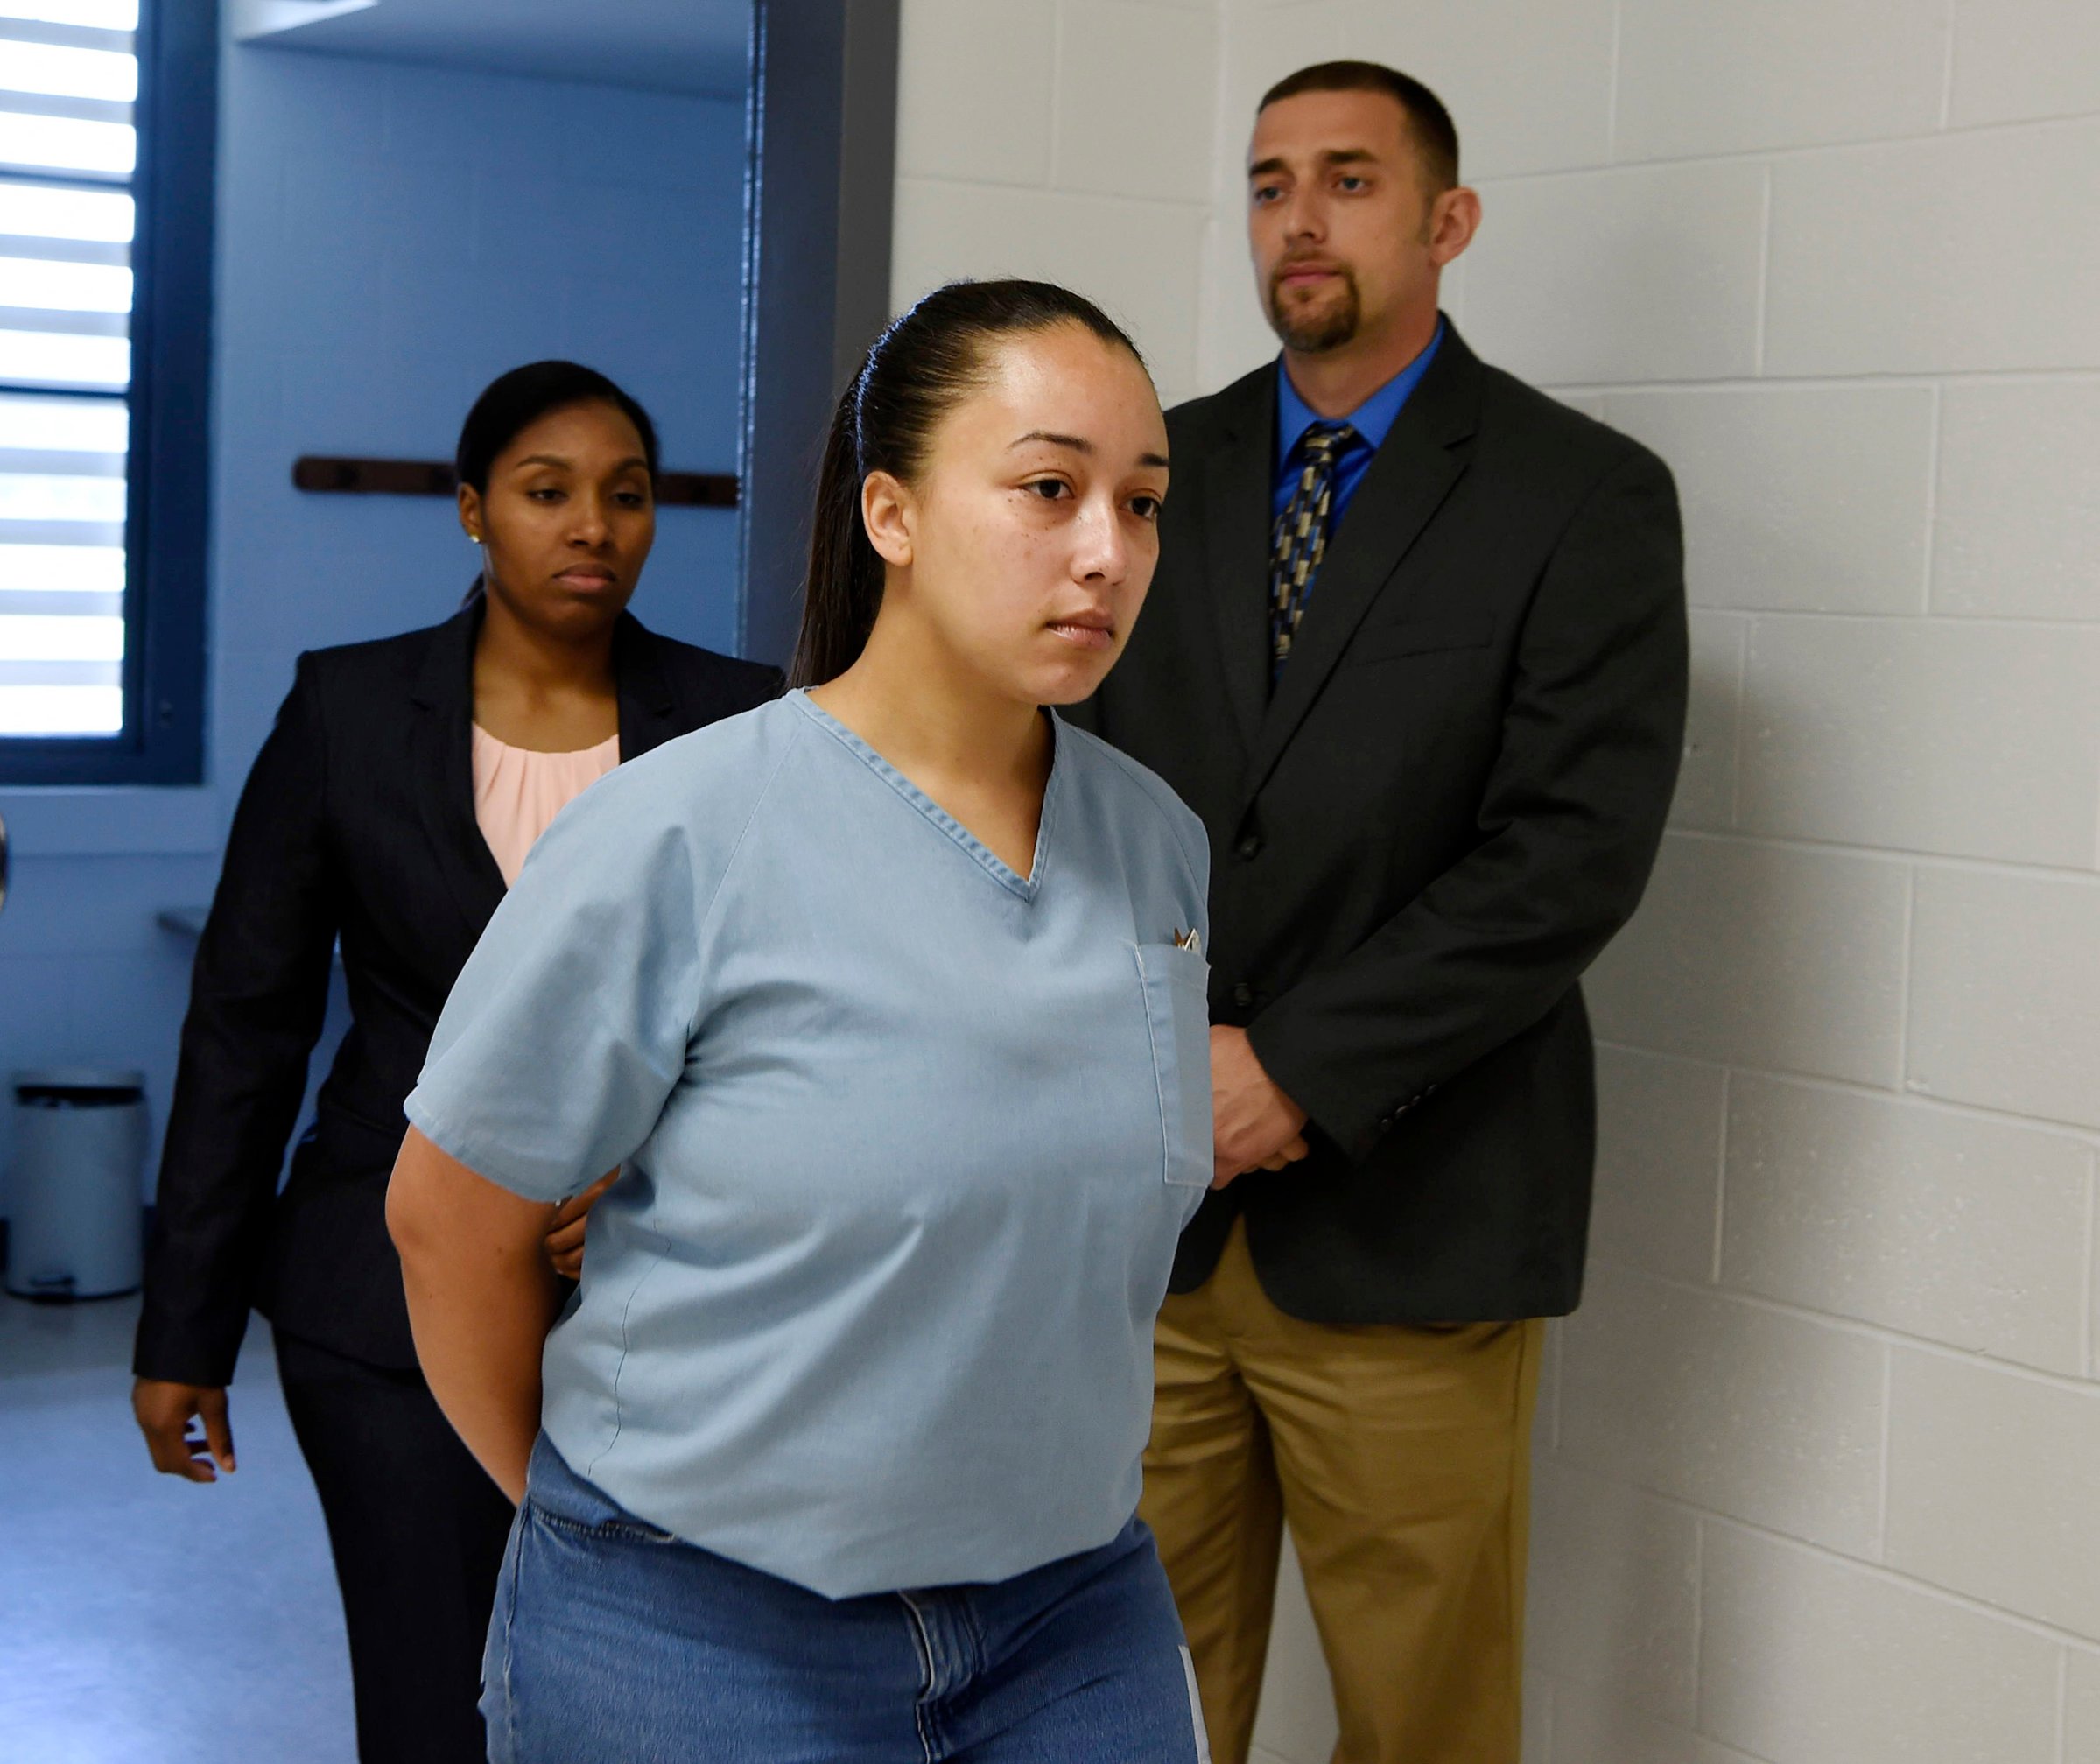 Cyntoia Brown, a woman serving a life sentence for killing a man when she was a 16-year-old prostitute, enters her clemency hearing Wednesday, May 23, 2018, at Tennessee Prison for Women in Nashville, Tenn.